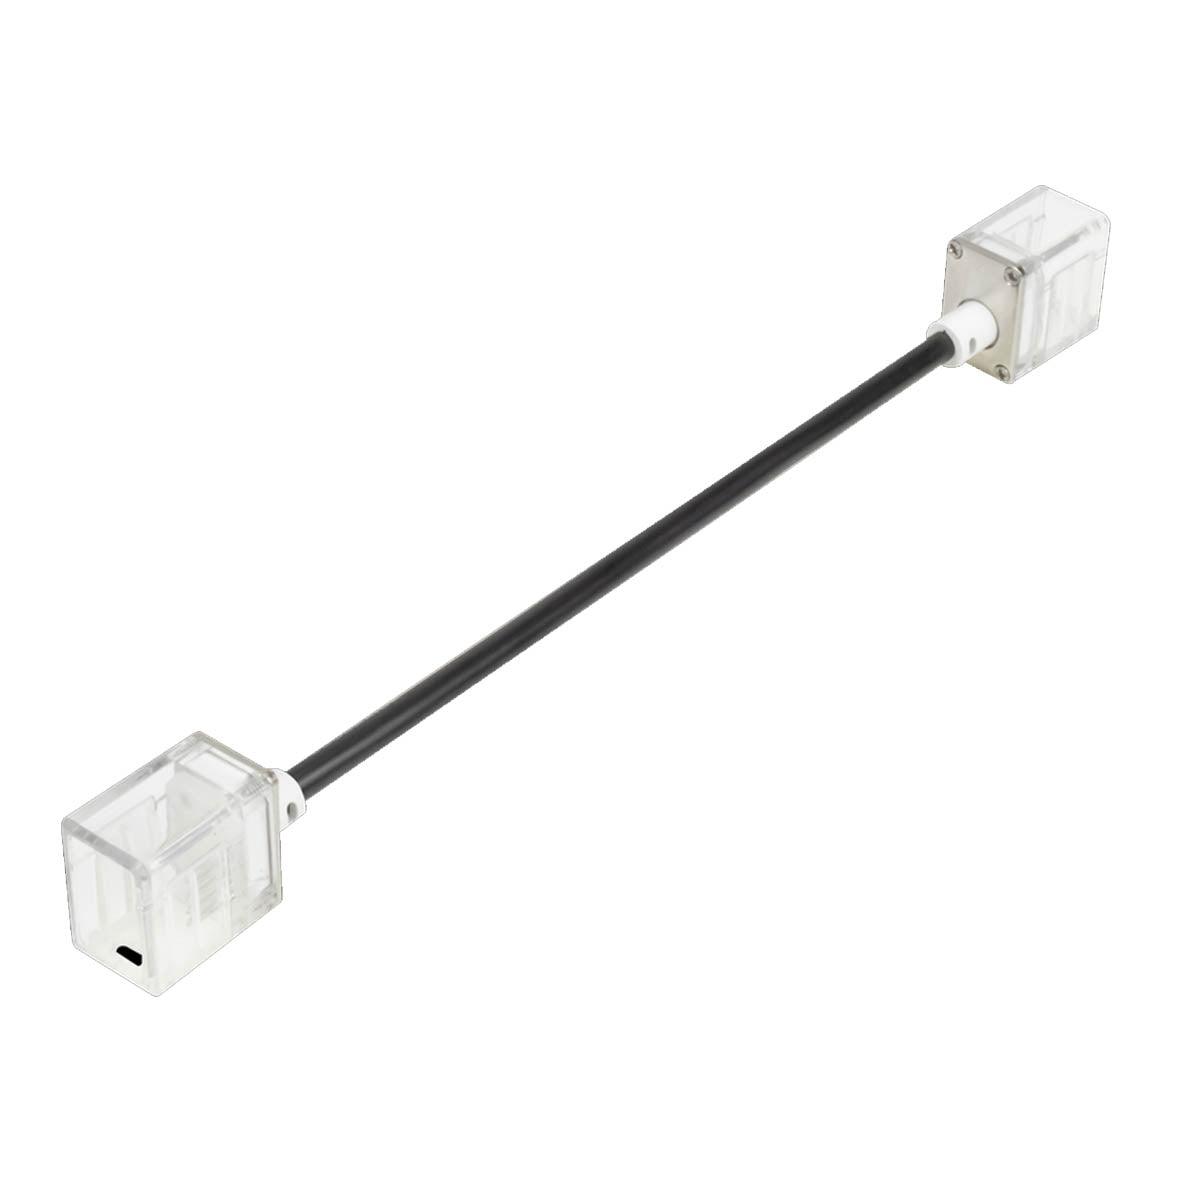 NeonFlex 24” Pro-L Linking Cable Front Feed (5-pin) - Bees Lighting